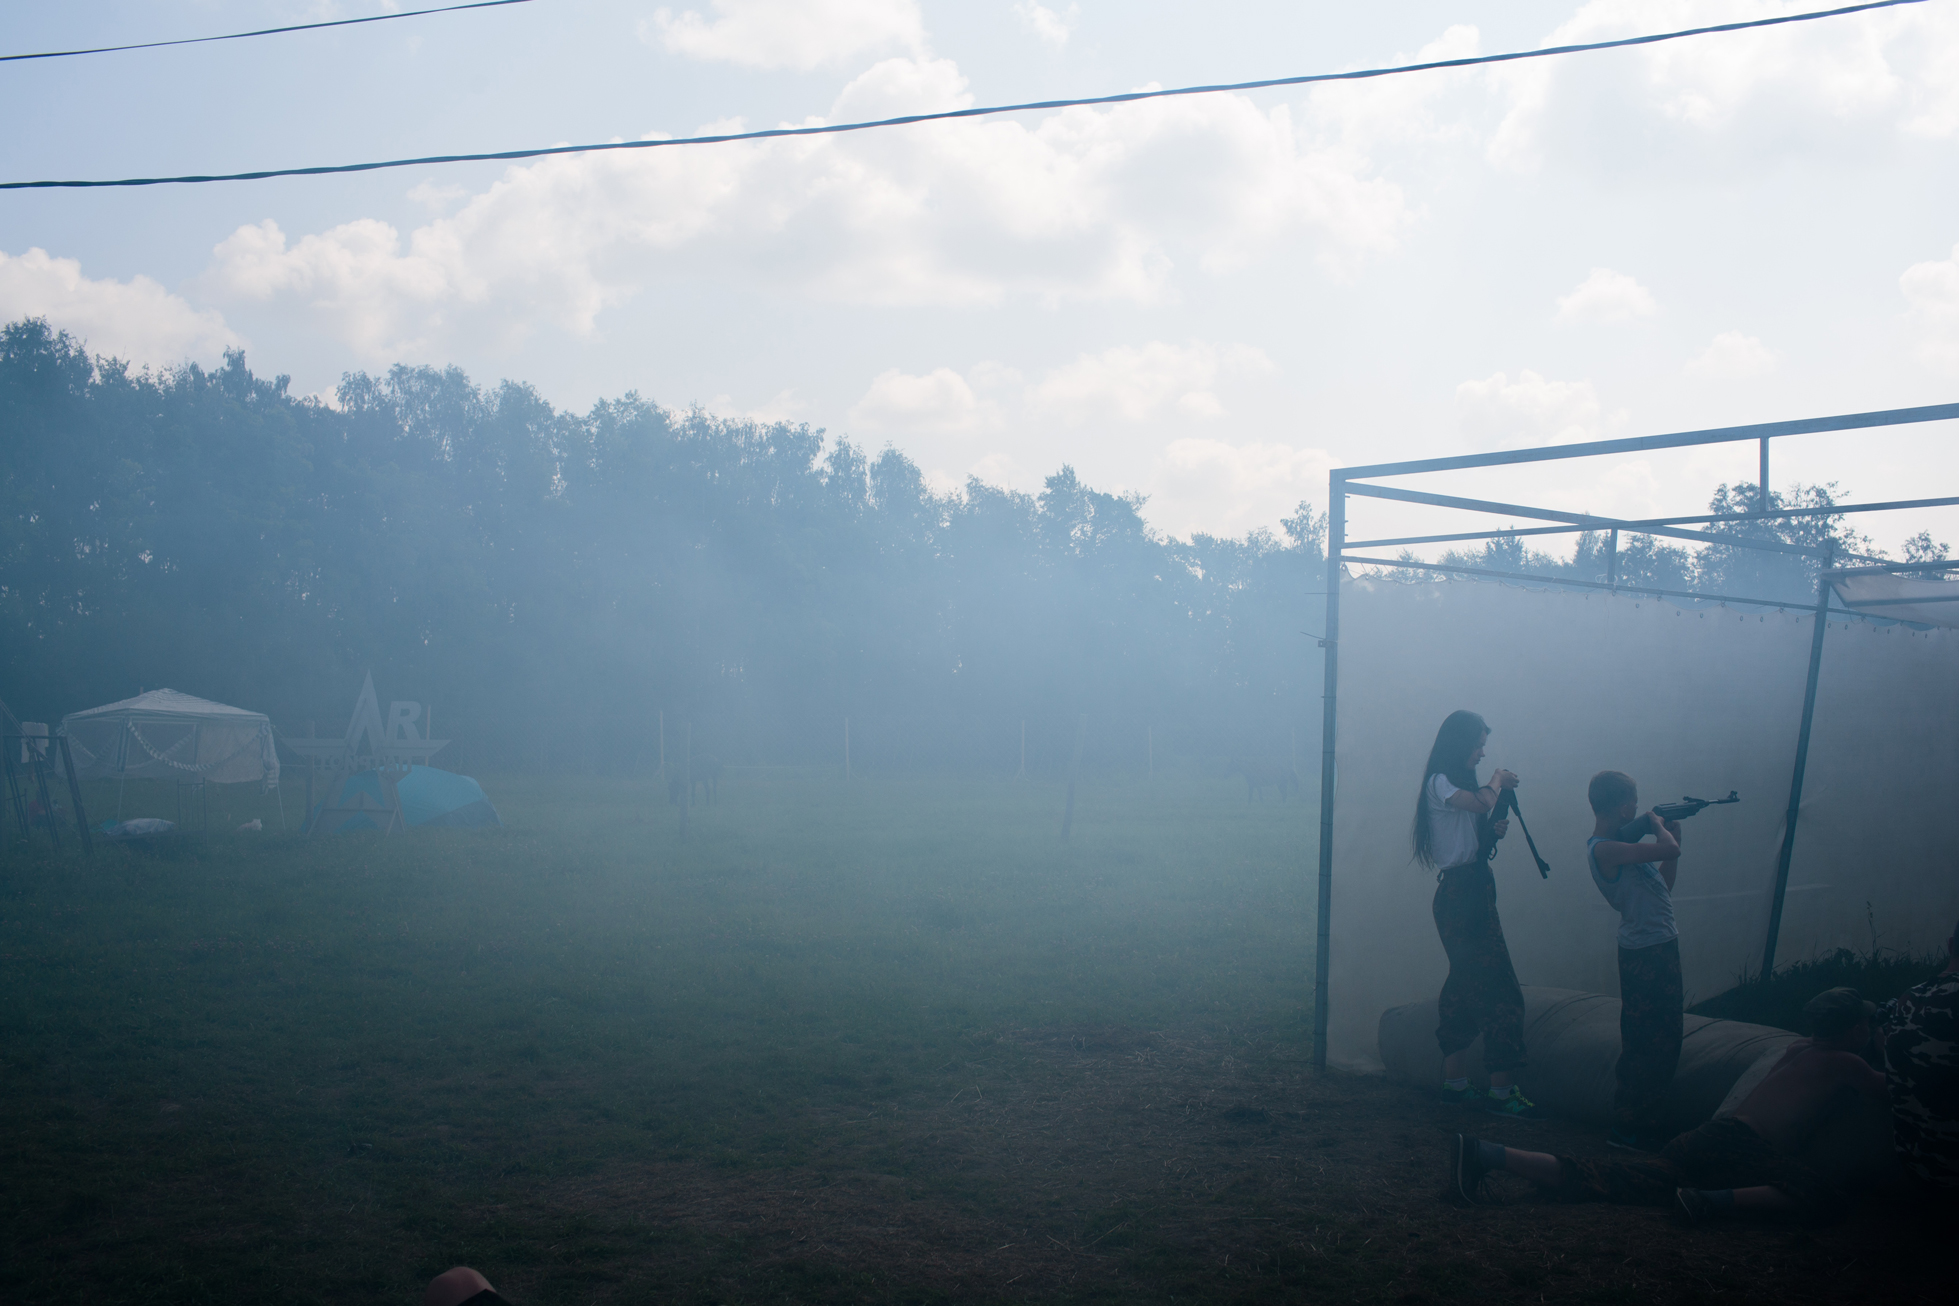 Campers at target practice. The smoke is from launching fake grenades.